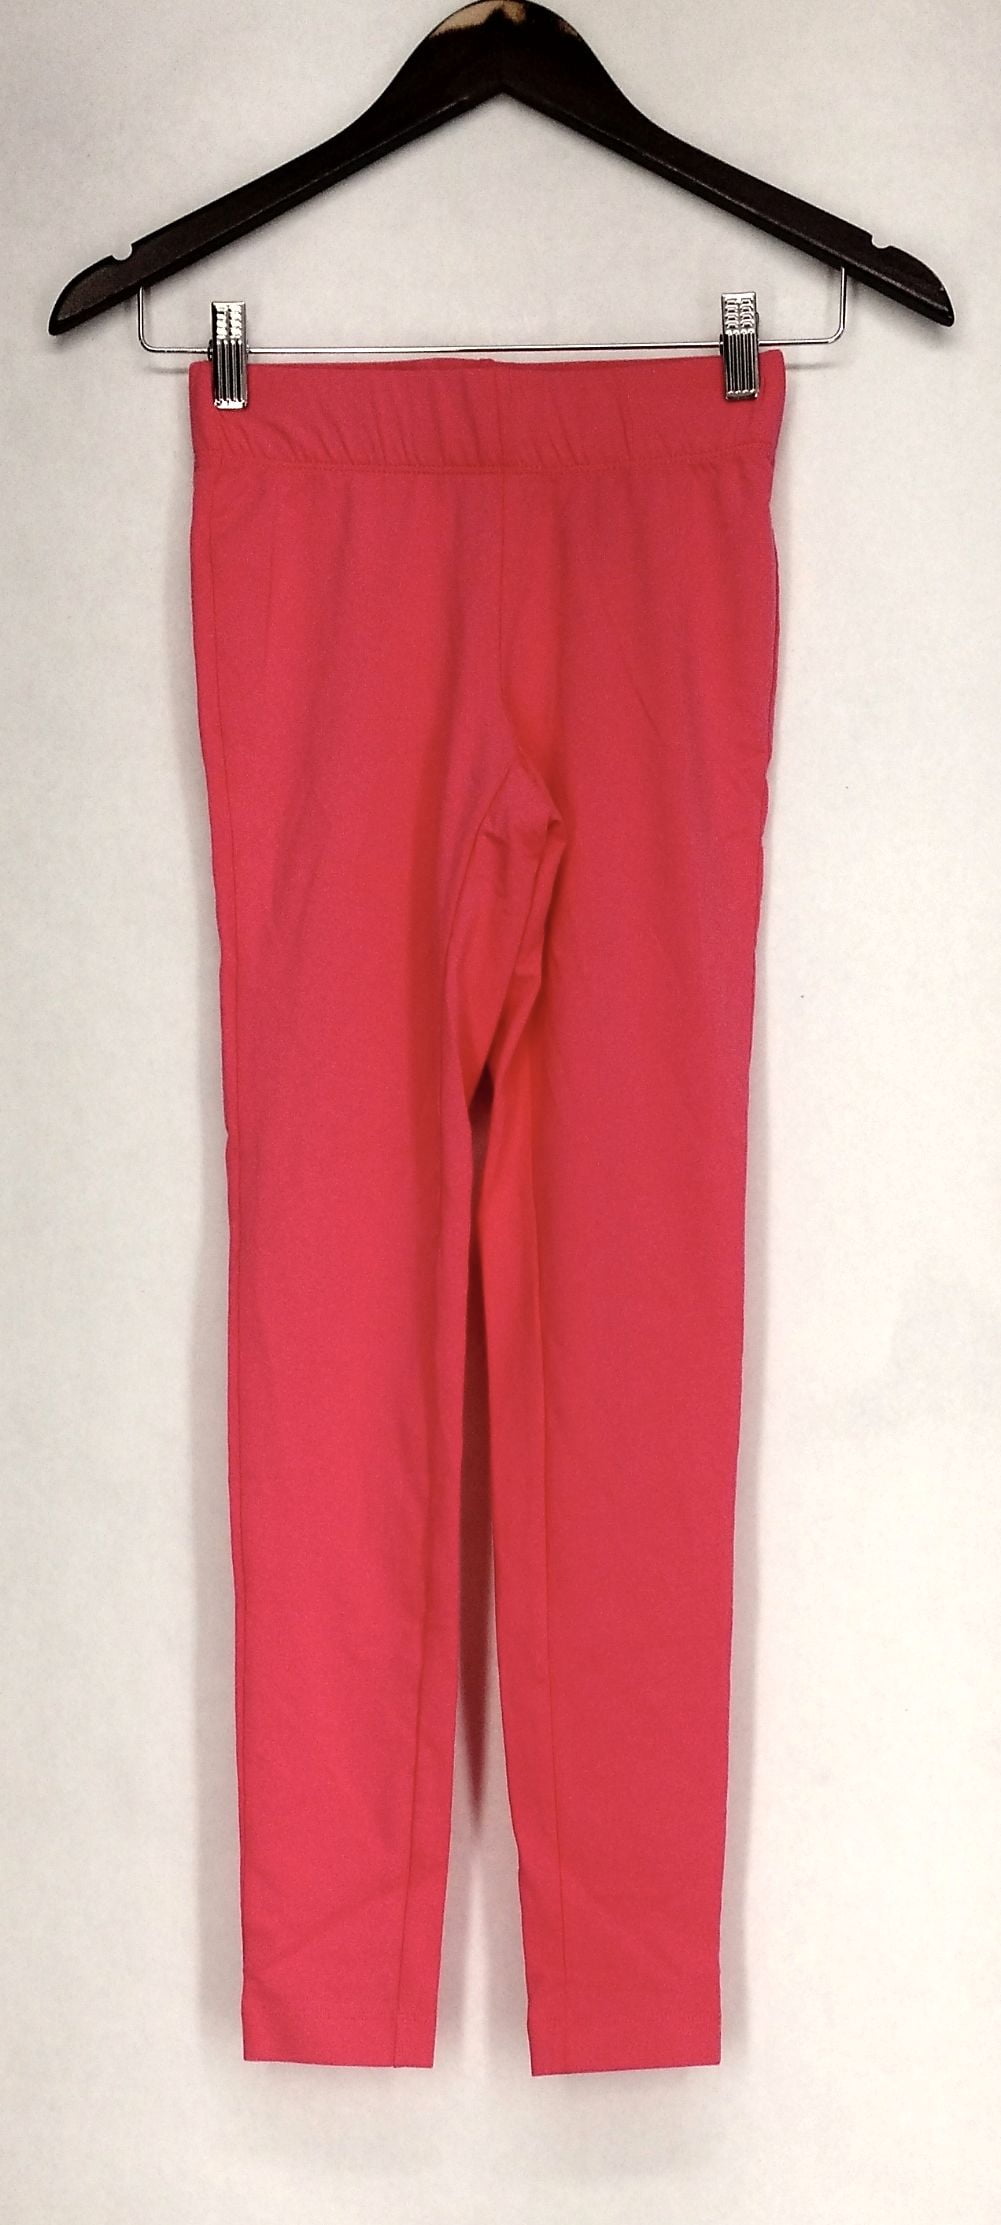 Slimming Options for Kate & Mallory Plus Size Leggings 1X Legging Pink A426083 